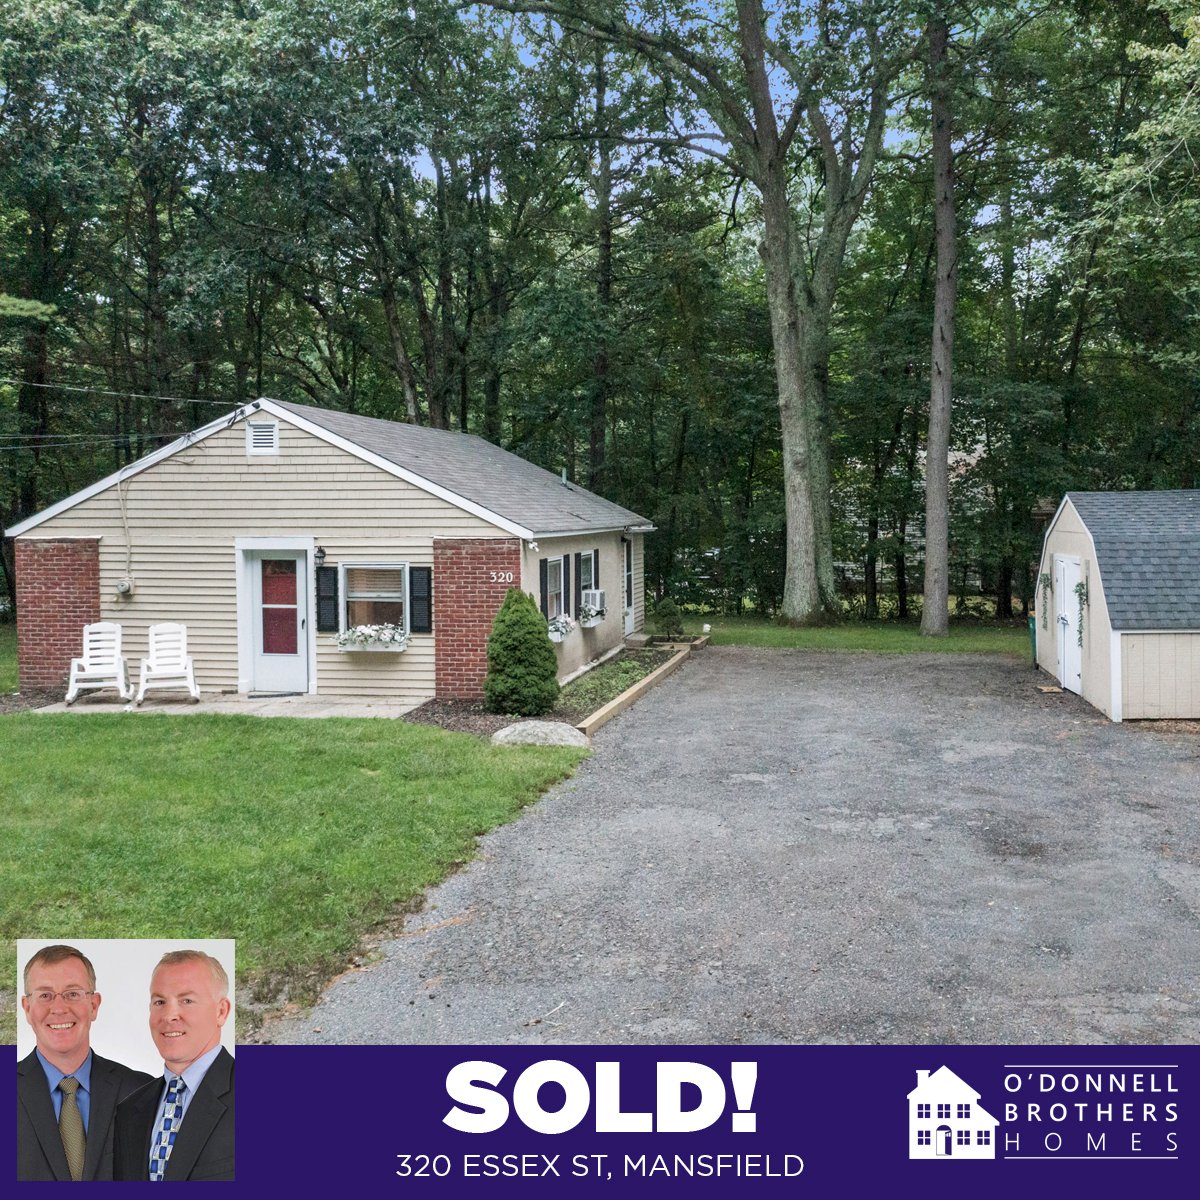 #JustSold this charming 2BD 1BA starter or downsizer opportunity in #MansfieldMA! Do you have changing real estate needs? Contact us today to guide you through the process!

#RealEstate #SellHome #SellHouse #RealEstateAgent